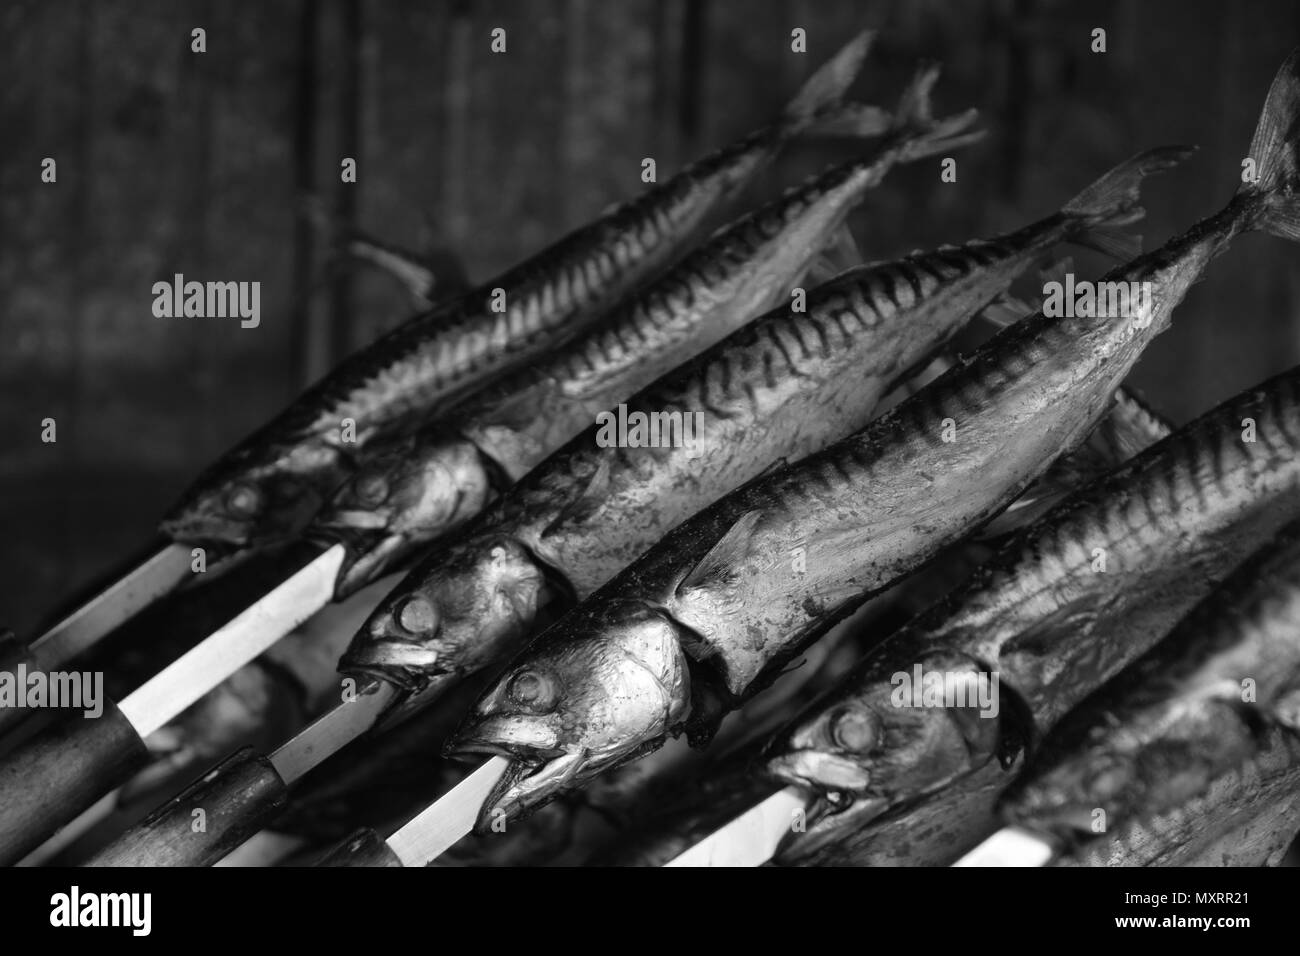 grilled scottish or norwegian mackerels on grill  in black and white Stock Photo